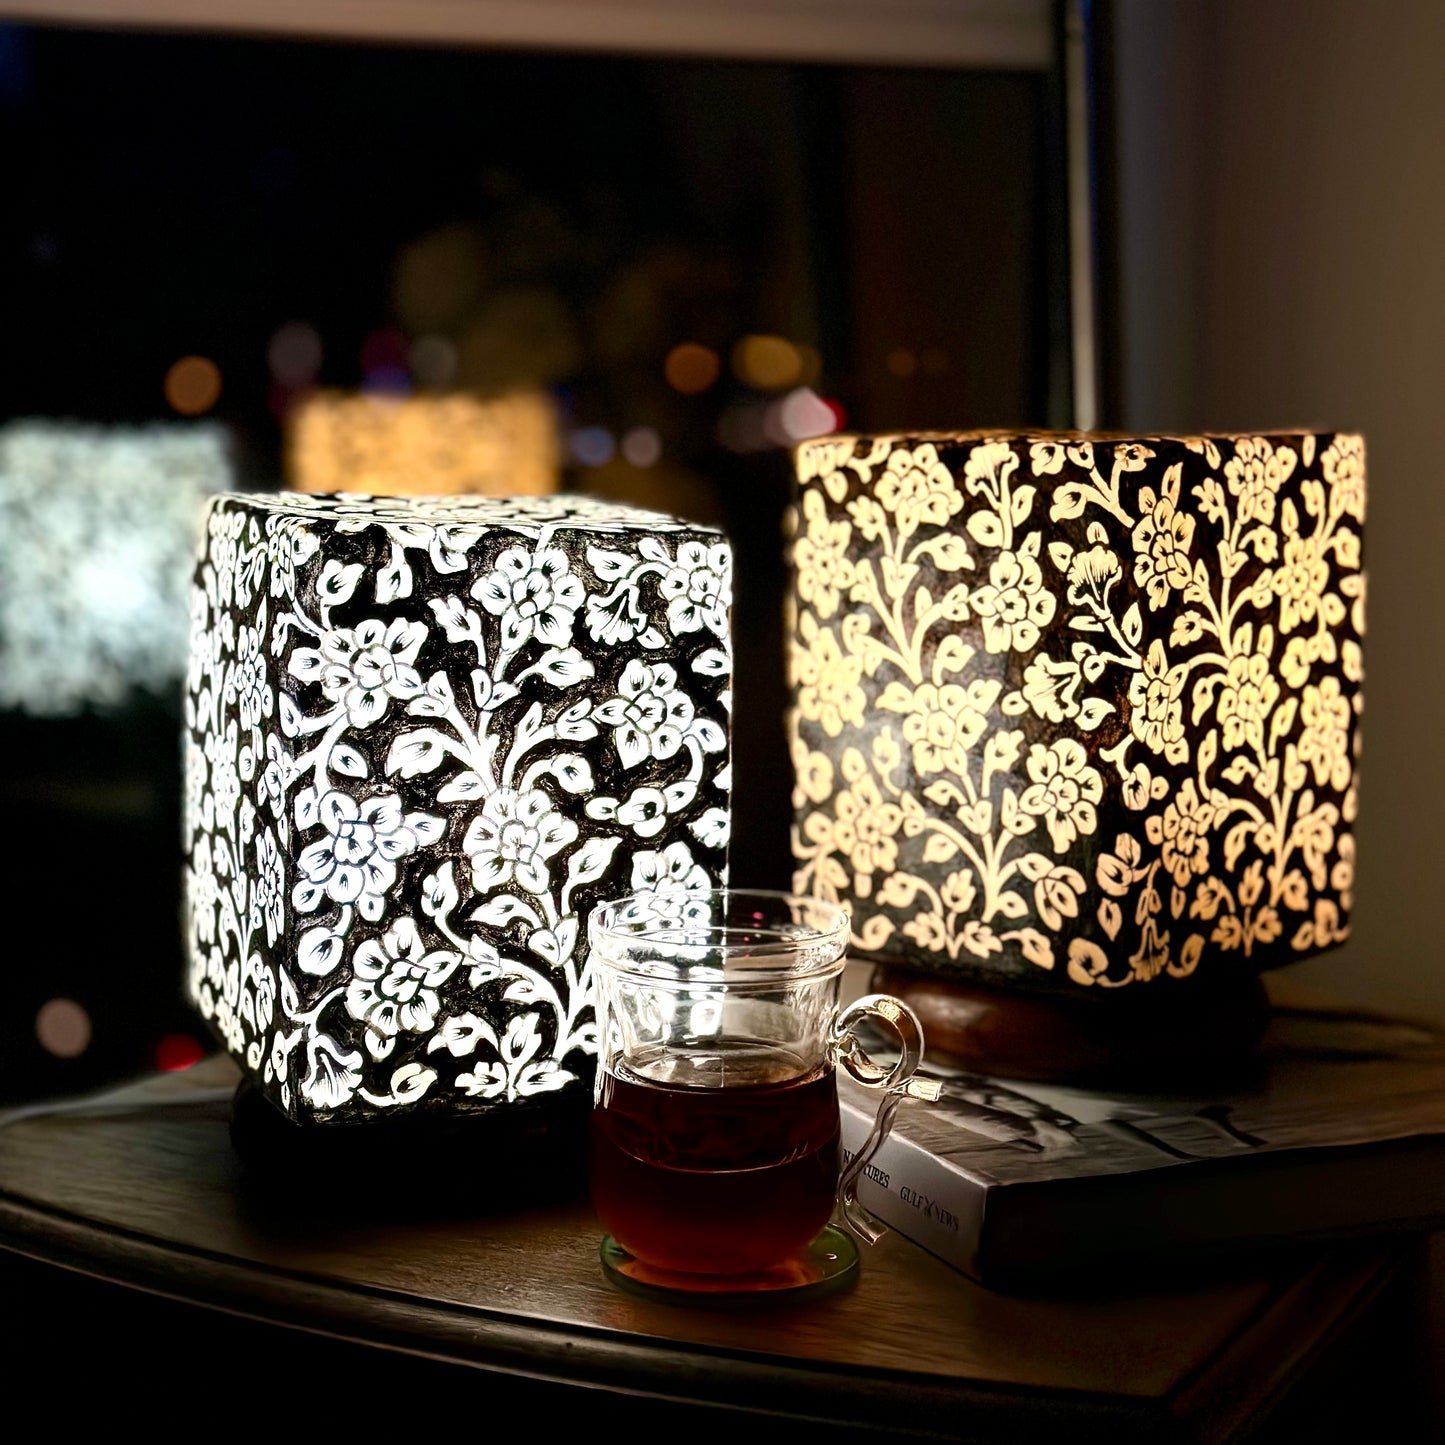 The Enchanted Black – Hand painted camel skin lamp